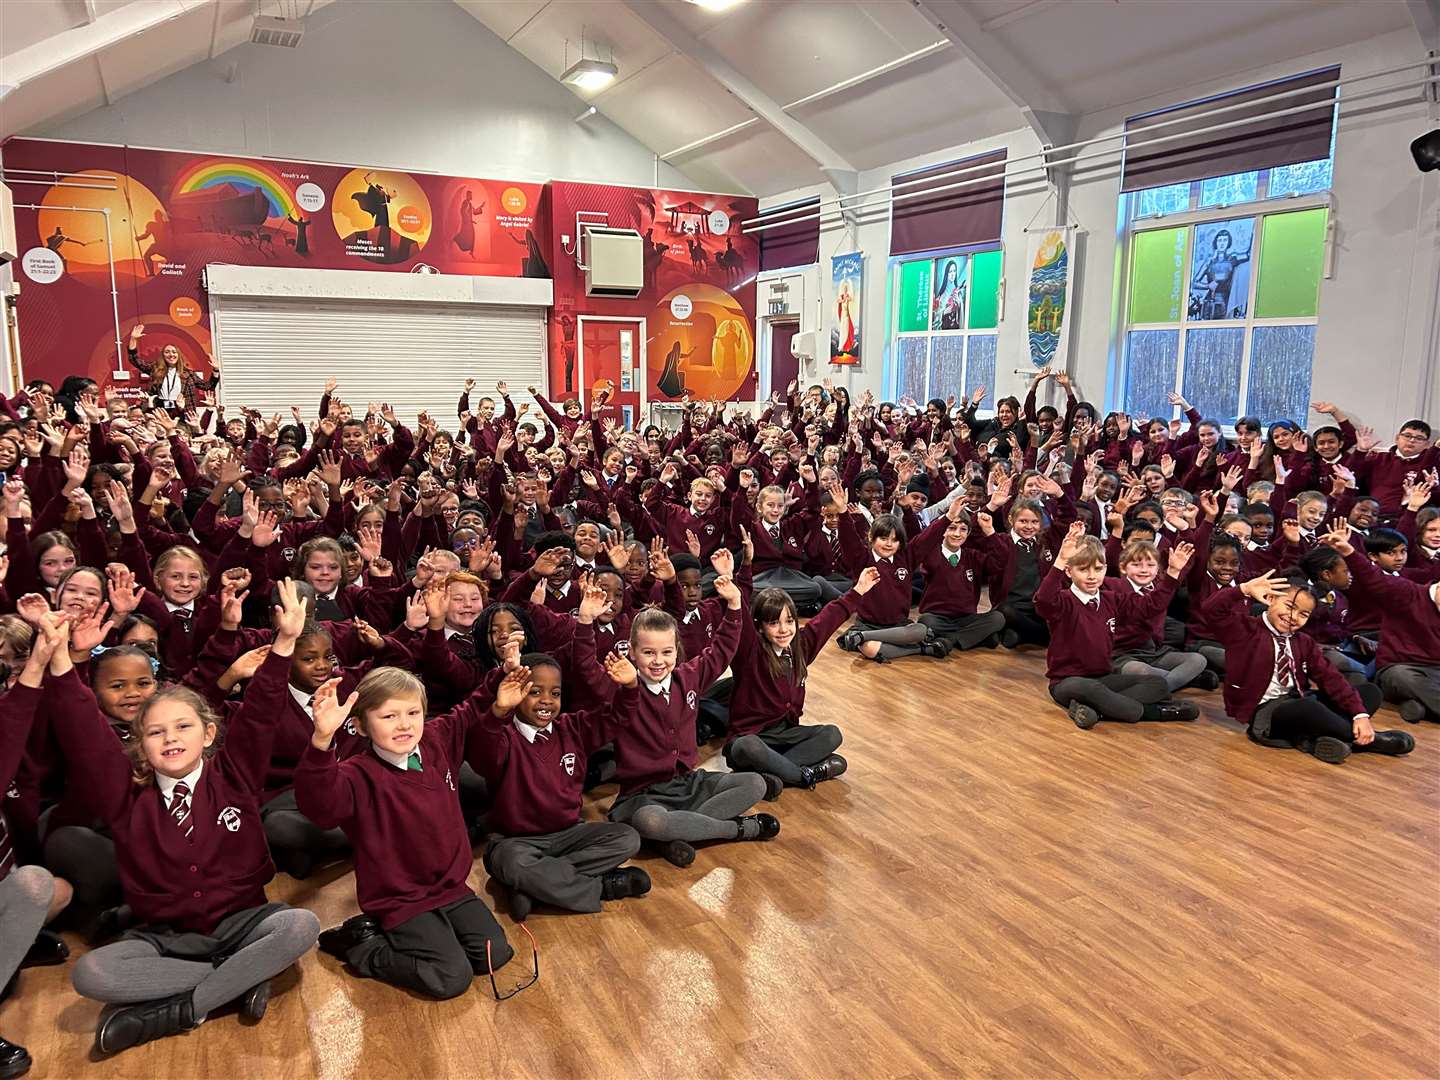 St Michael's RC Primary School and Nursery has been rated "outstanding" for the first time